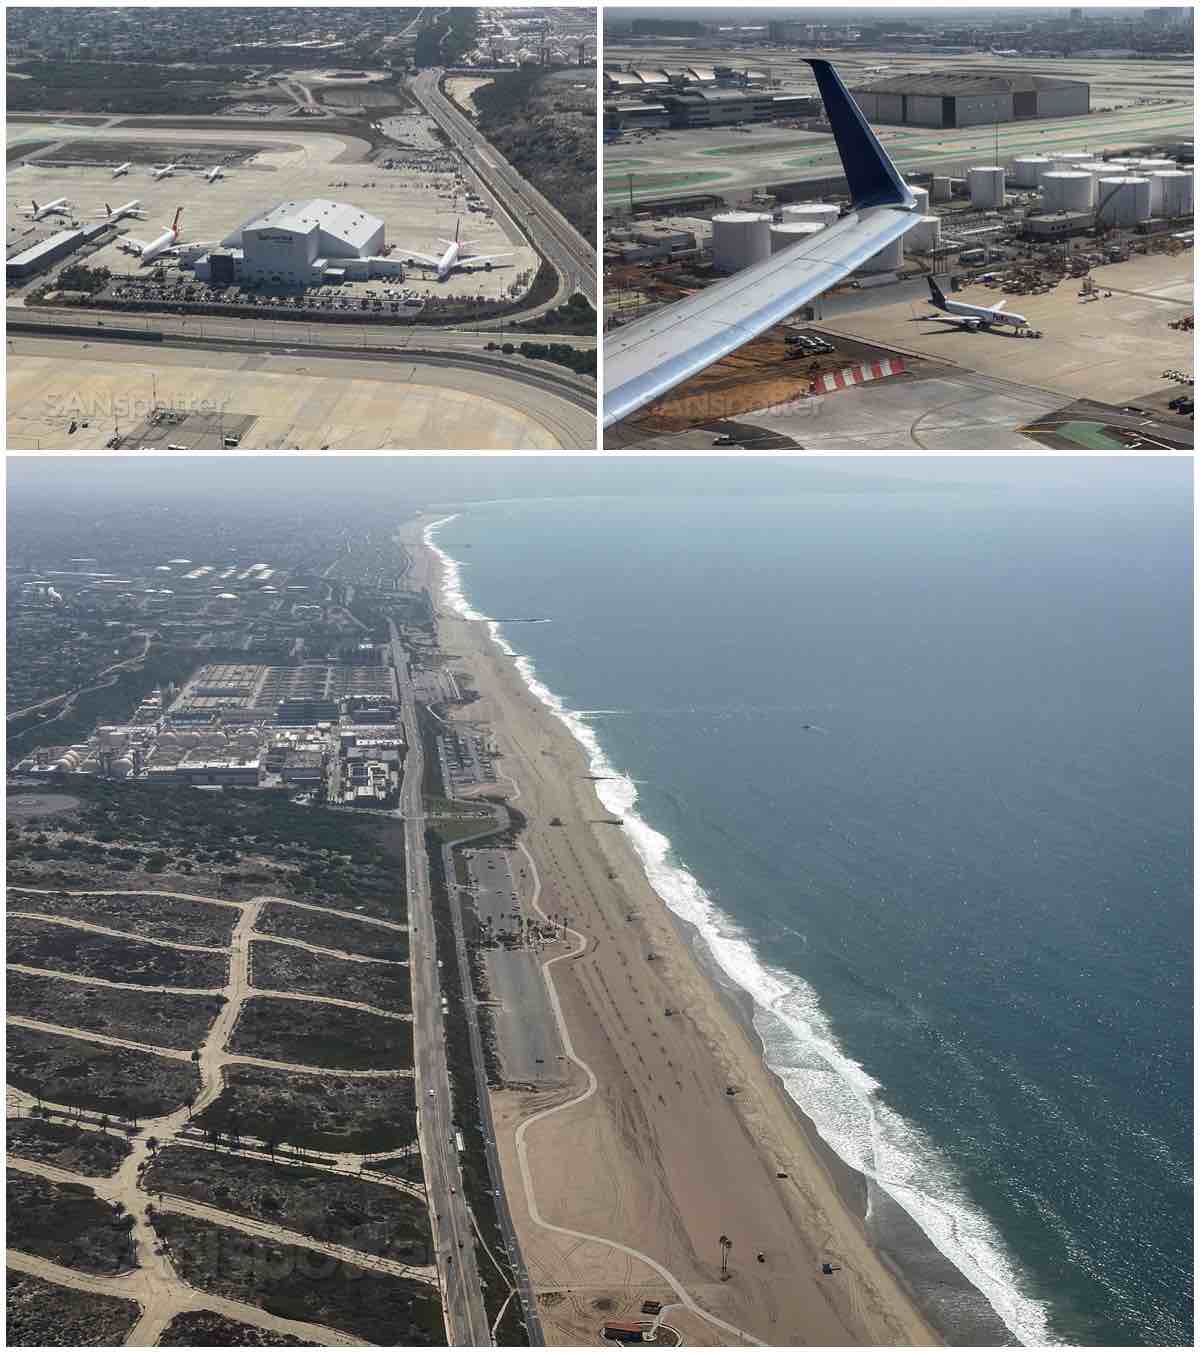 View of coastline after takeoff from LAX